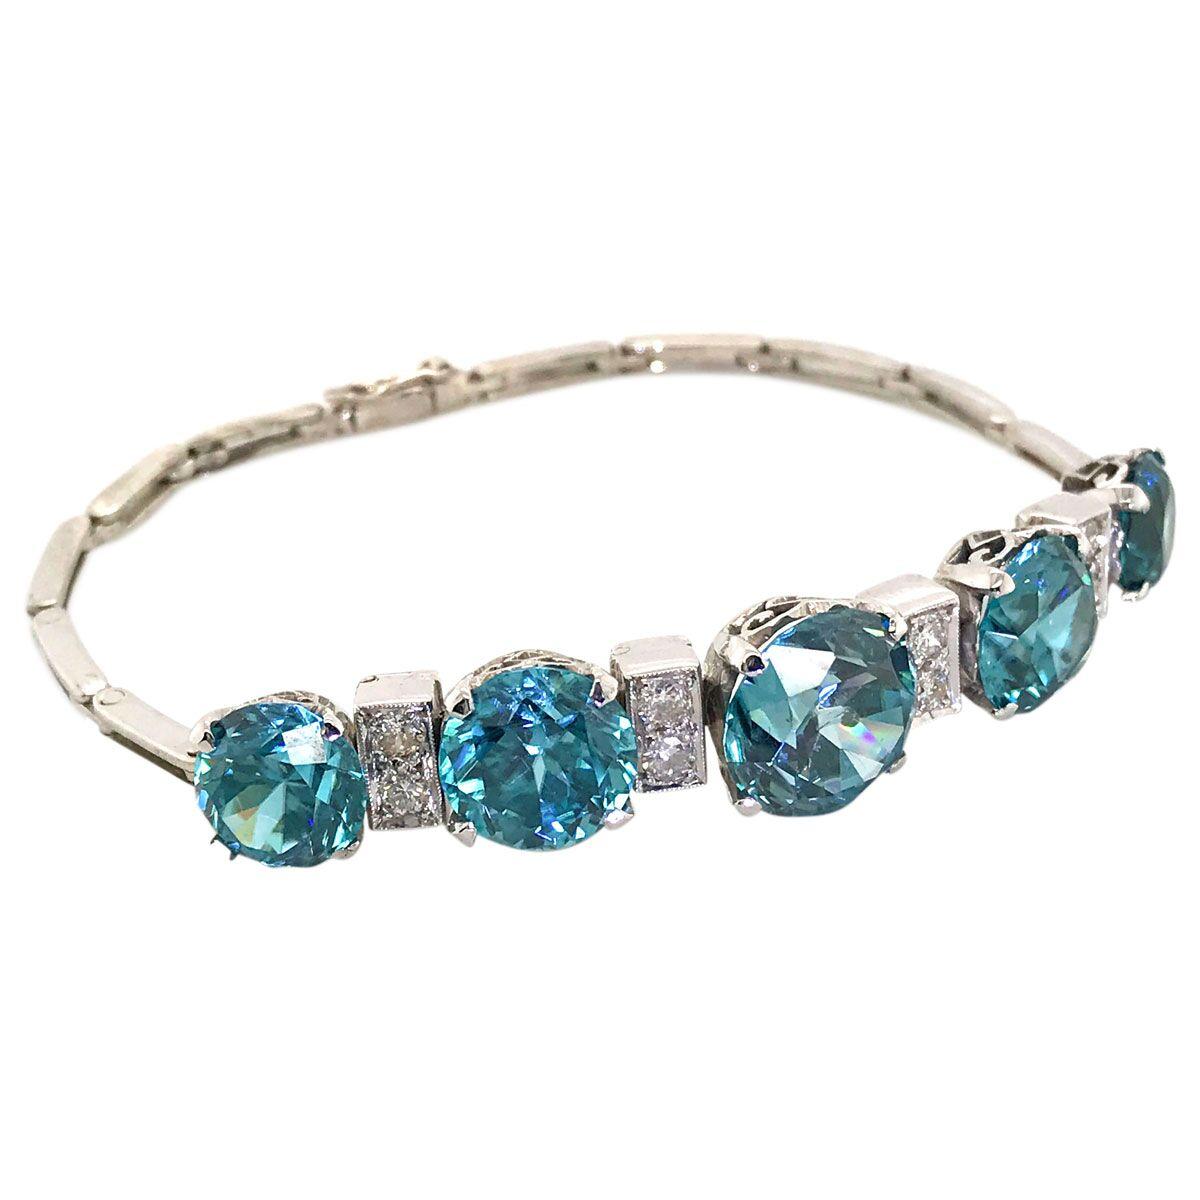 Do you love blue zircons? If the answer to that is a resounding YES, then you need to look closely at this bracelet. Fashioned in 14 karat white gold, it has the most amazing blue zircons you will ever see. It's hard to find one brilliant blue